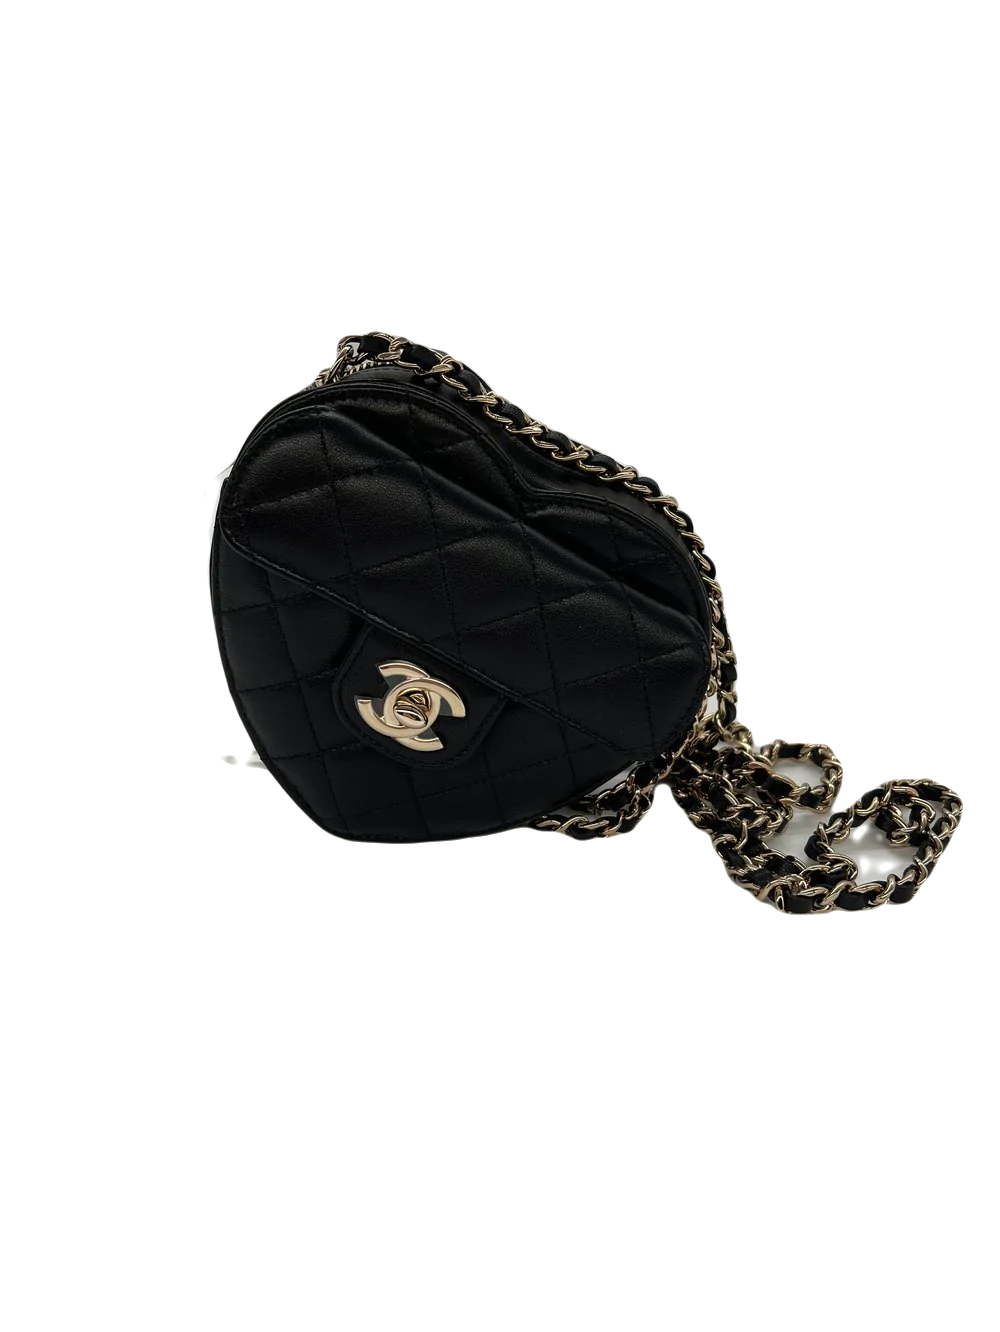 Chanel Heart Bag Small - Black - SOLD